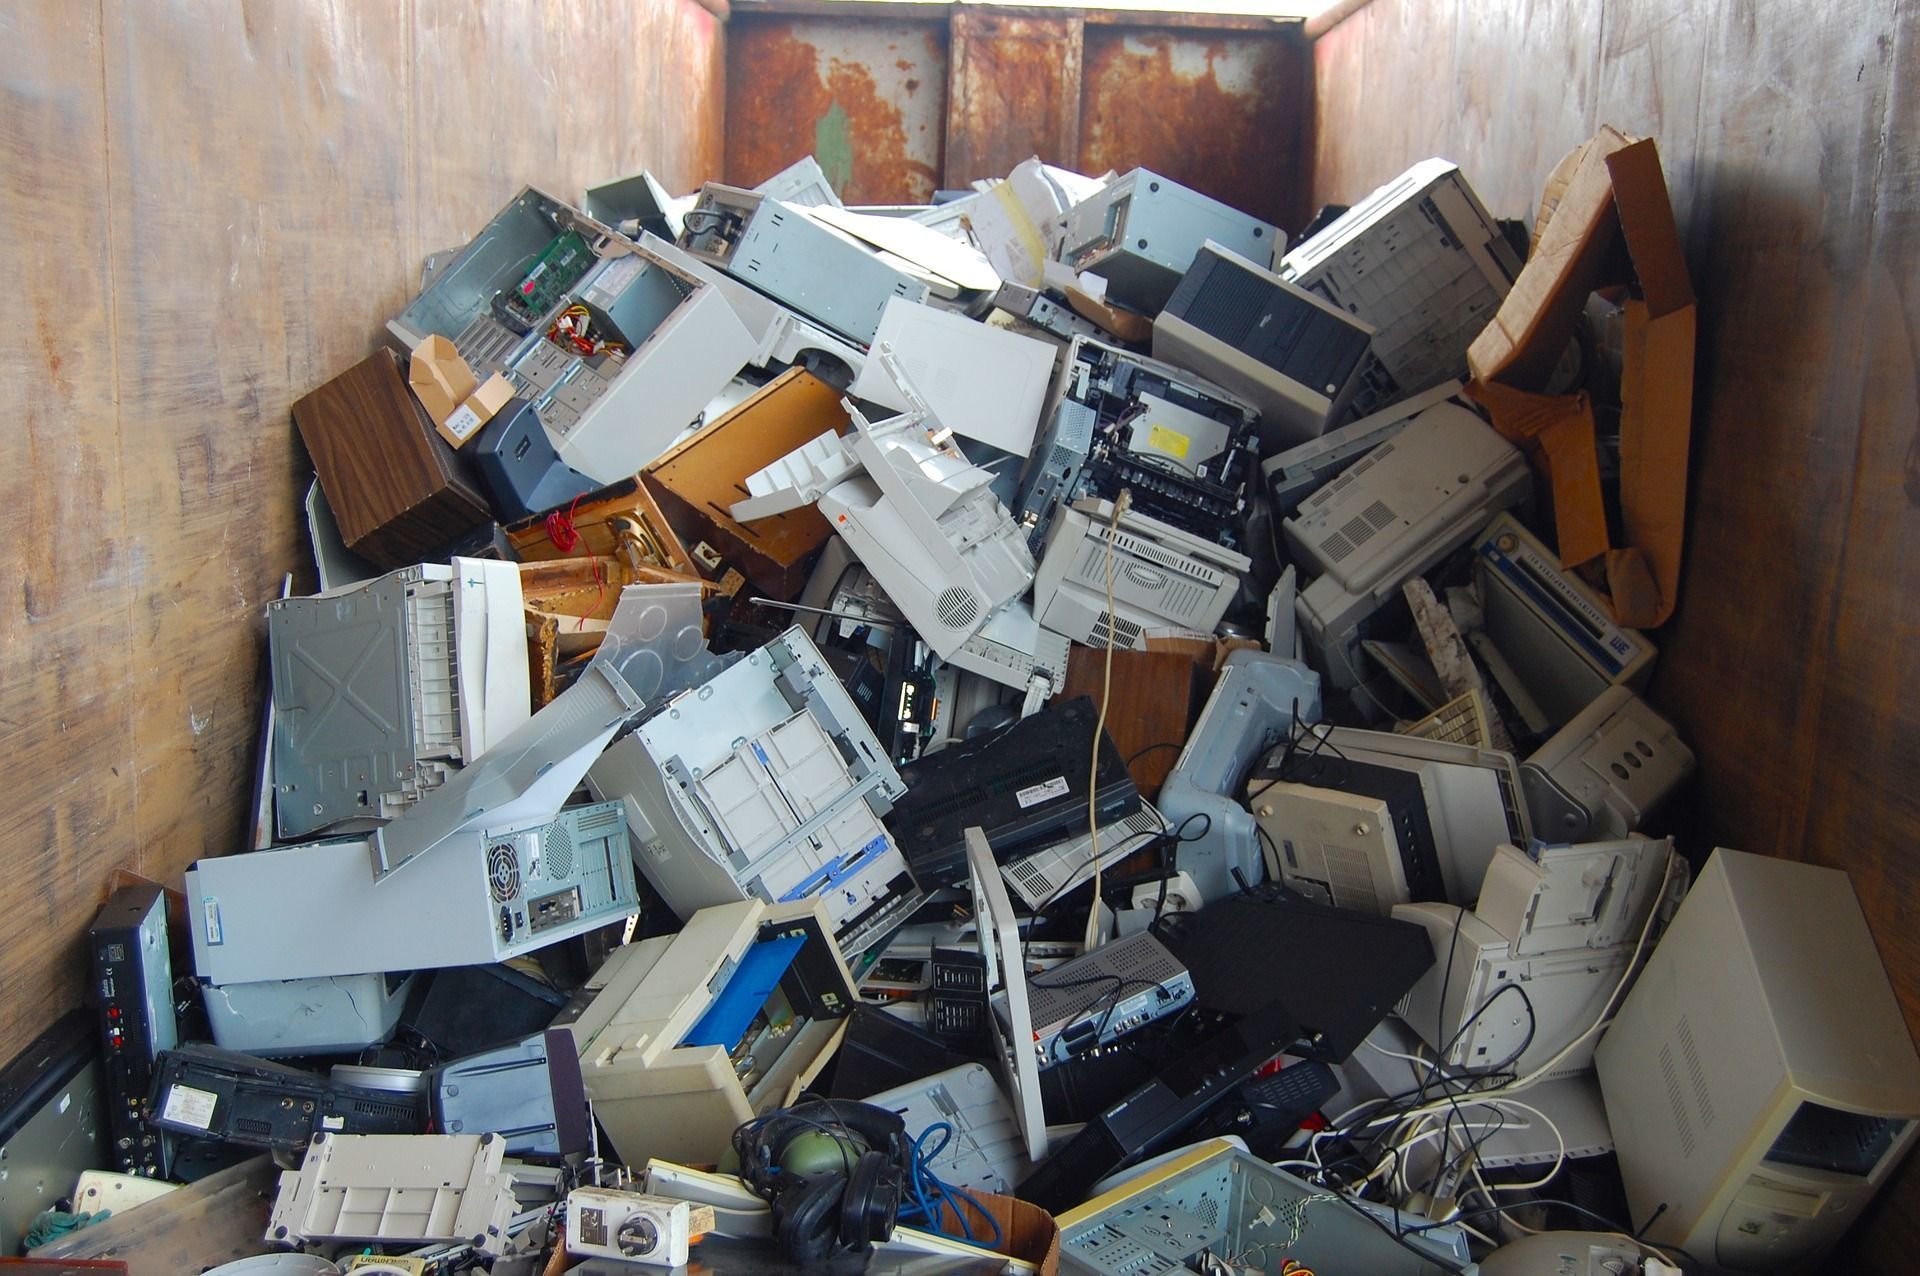 How to Recycle Electronics